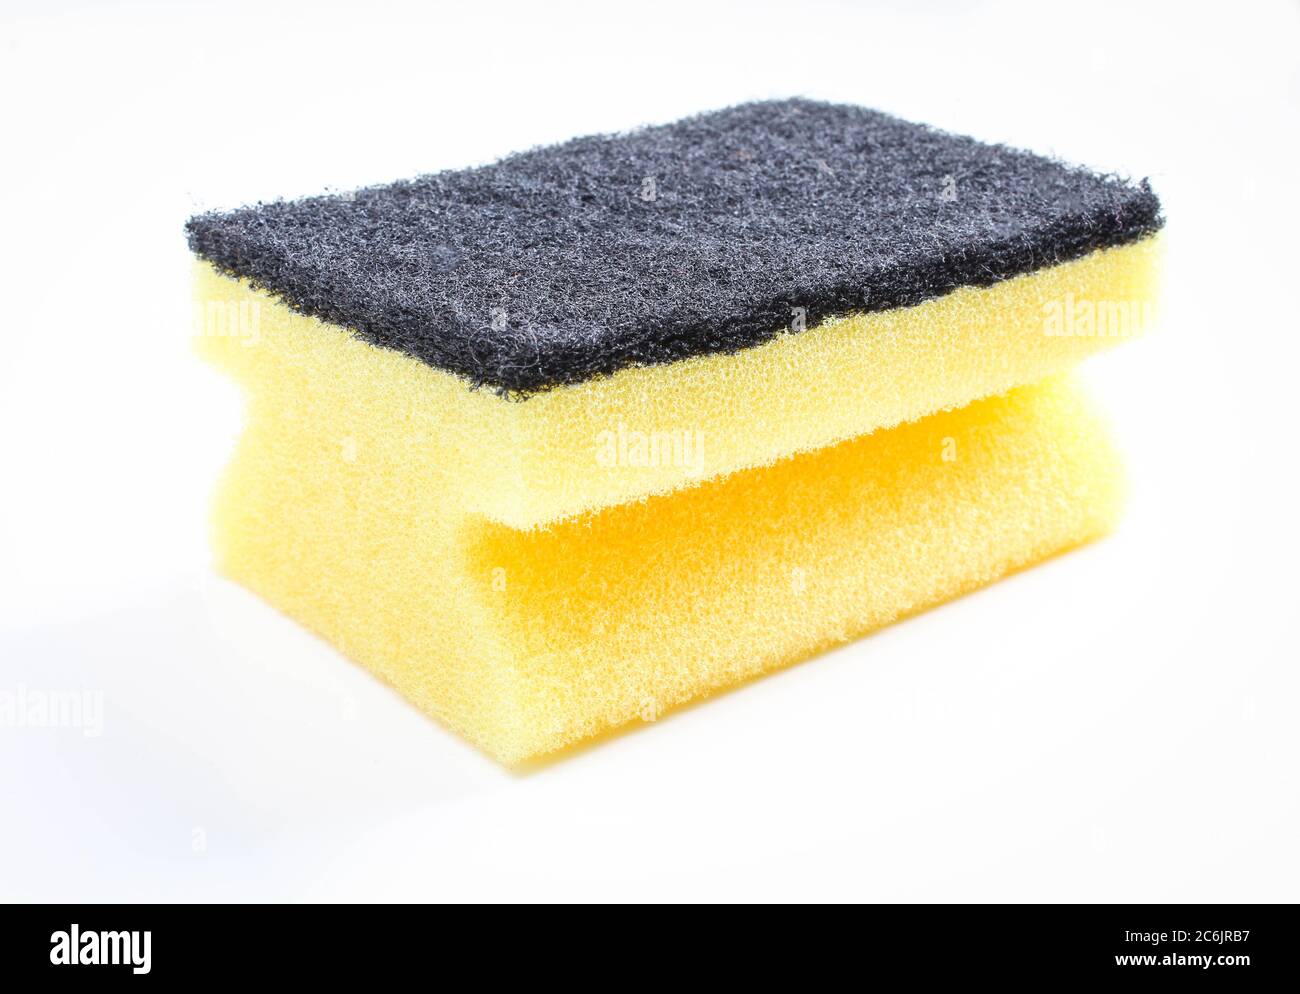 Kitchen Sponges For Washing Dishes On A White Background. Three Black  Sponges For Plumbing Work, Washing Dishes, Cleaning The Bathroom And Other  Household Needs. Stock Photo, Picture and Royalty Free Image. Image